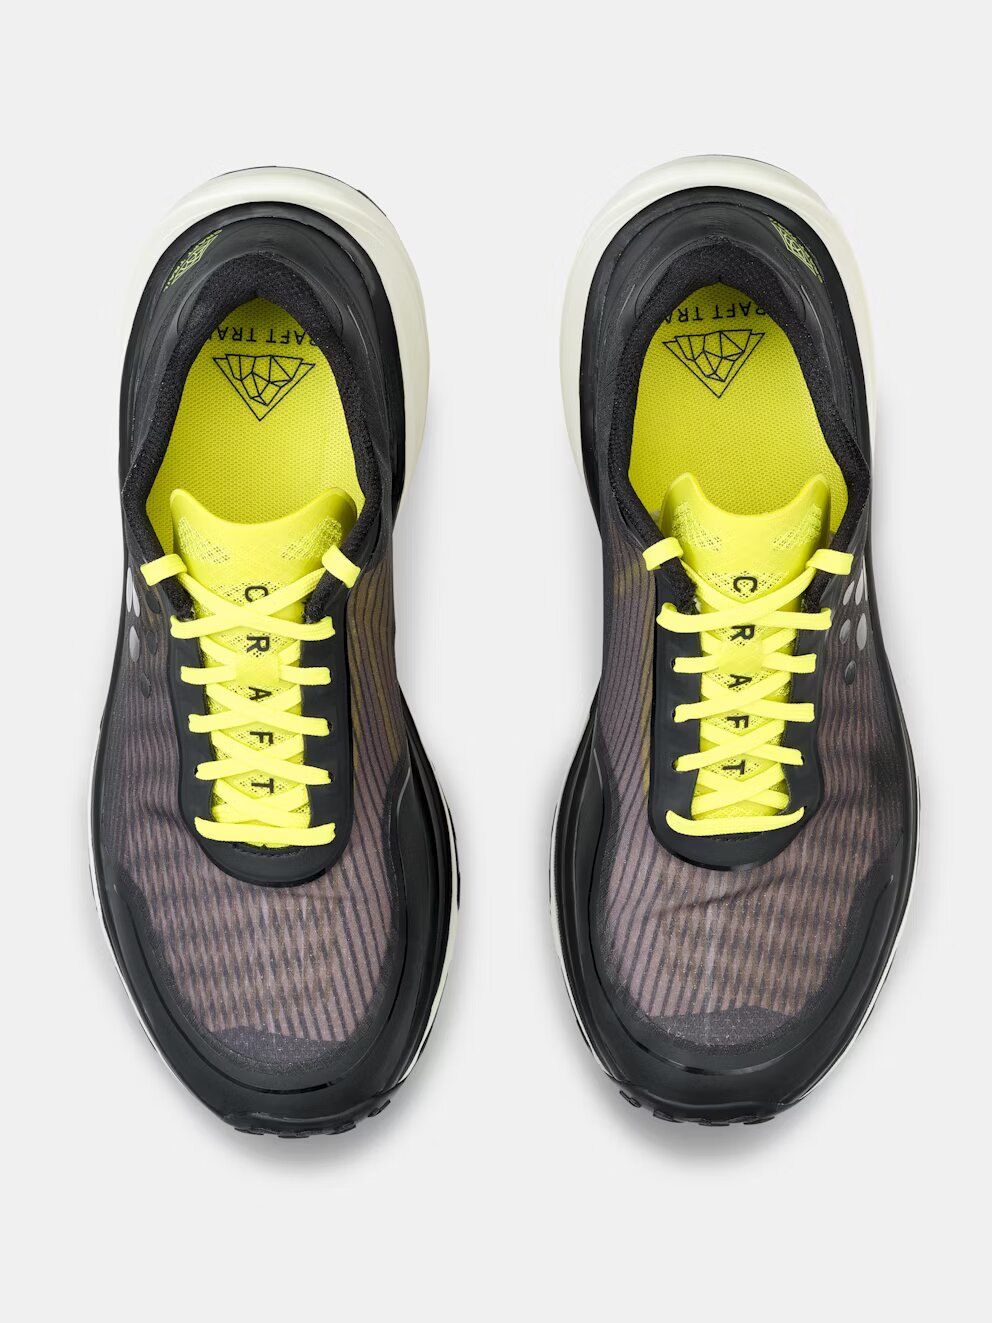 Black/neon yellow pure trail sneakers